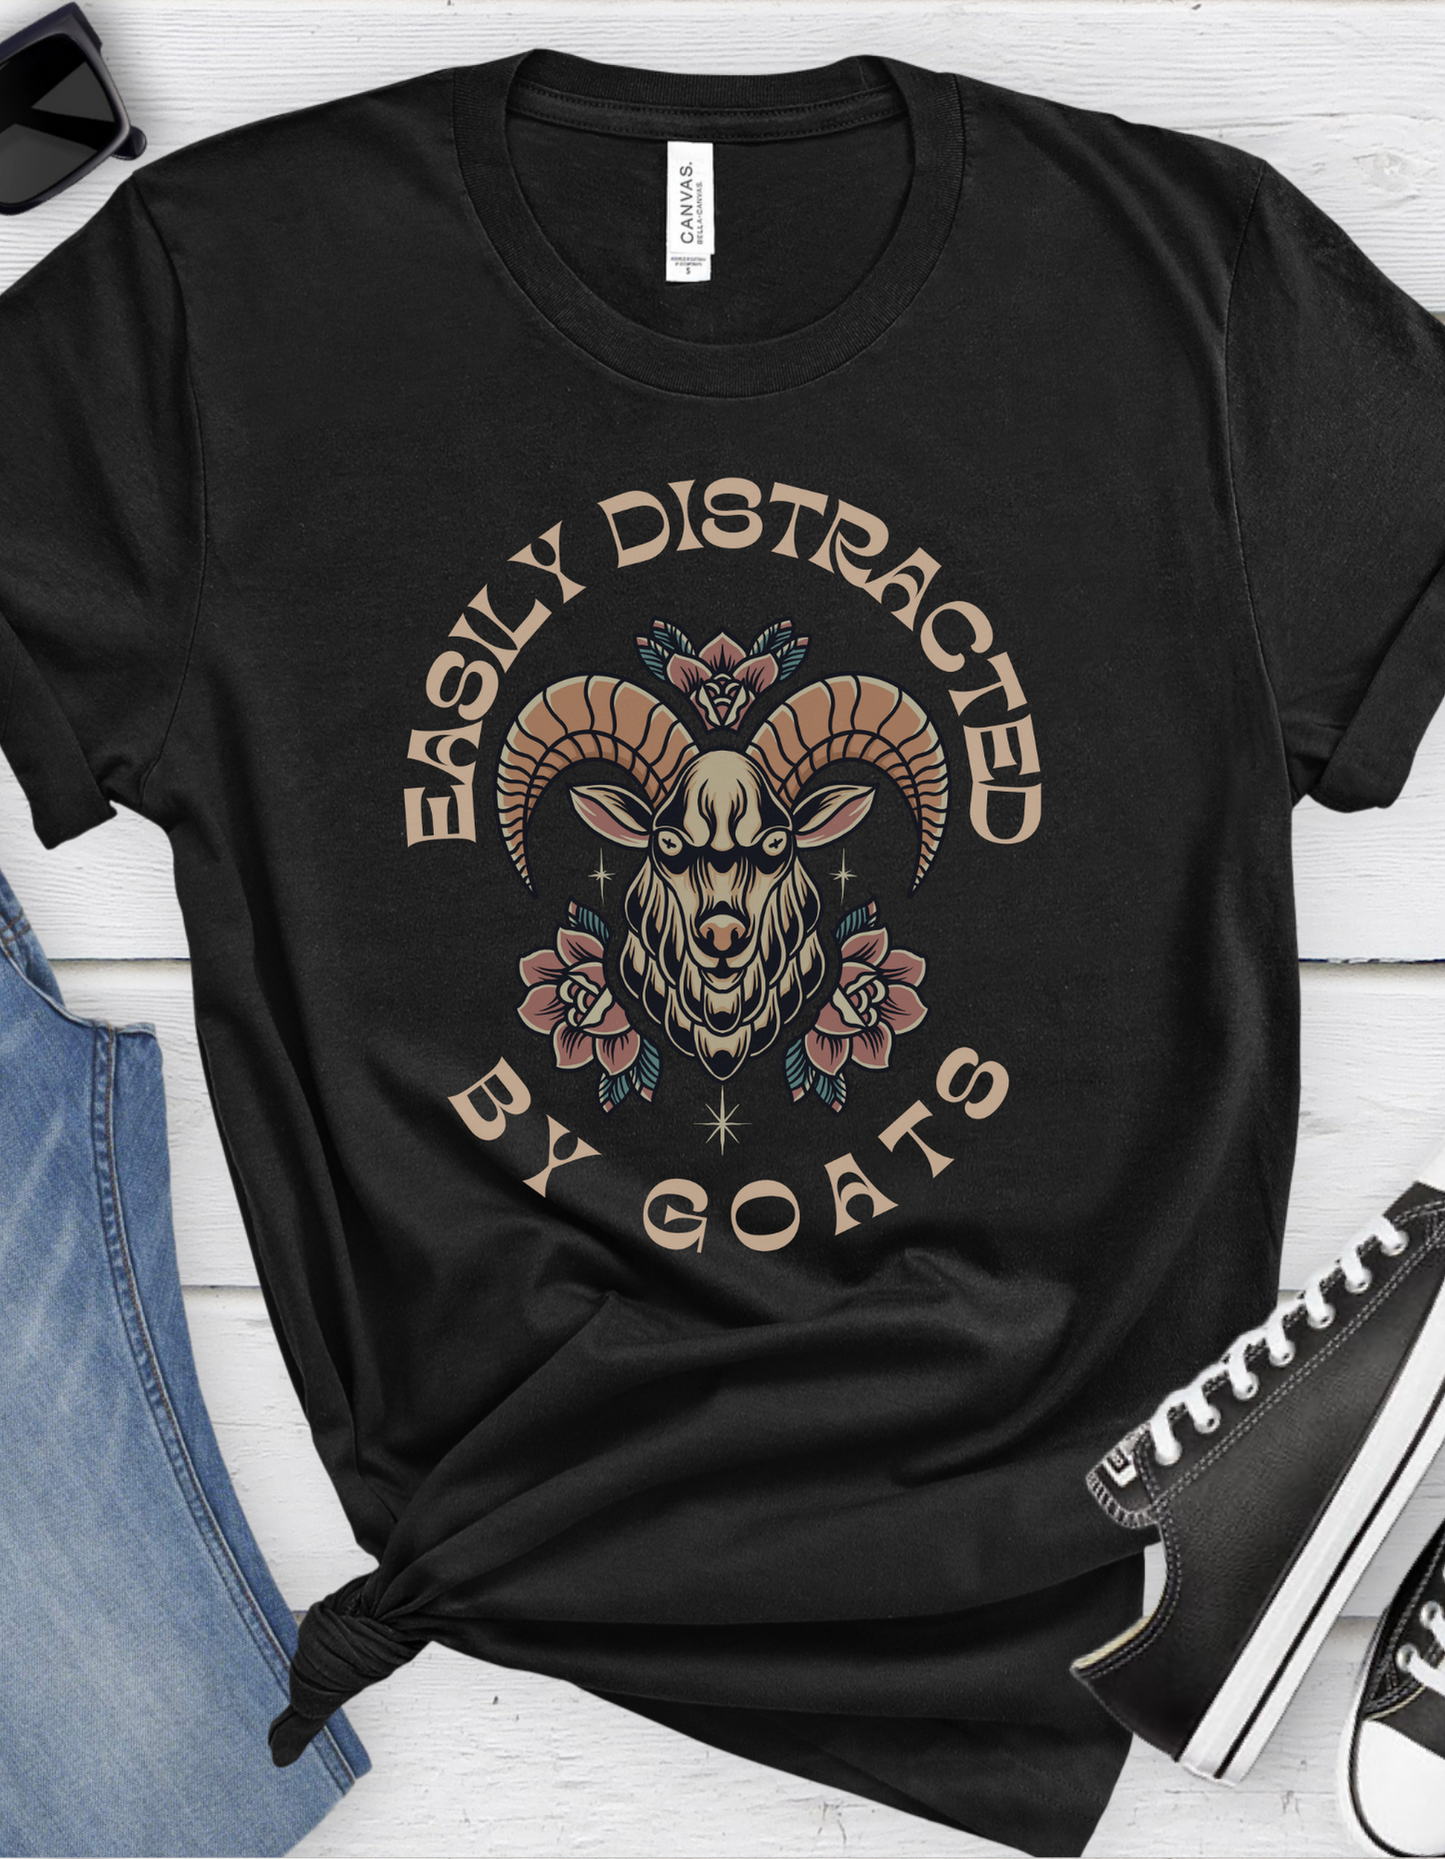 Easily Distracted By Goats Tattoo T-shirt / Traditional Tattoo Tee Shirt / Punk Rock Clothing Tshirt Rockabilly Psychobilly Freak Goth - Foxlark Crystal Jewelry